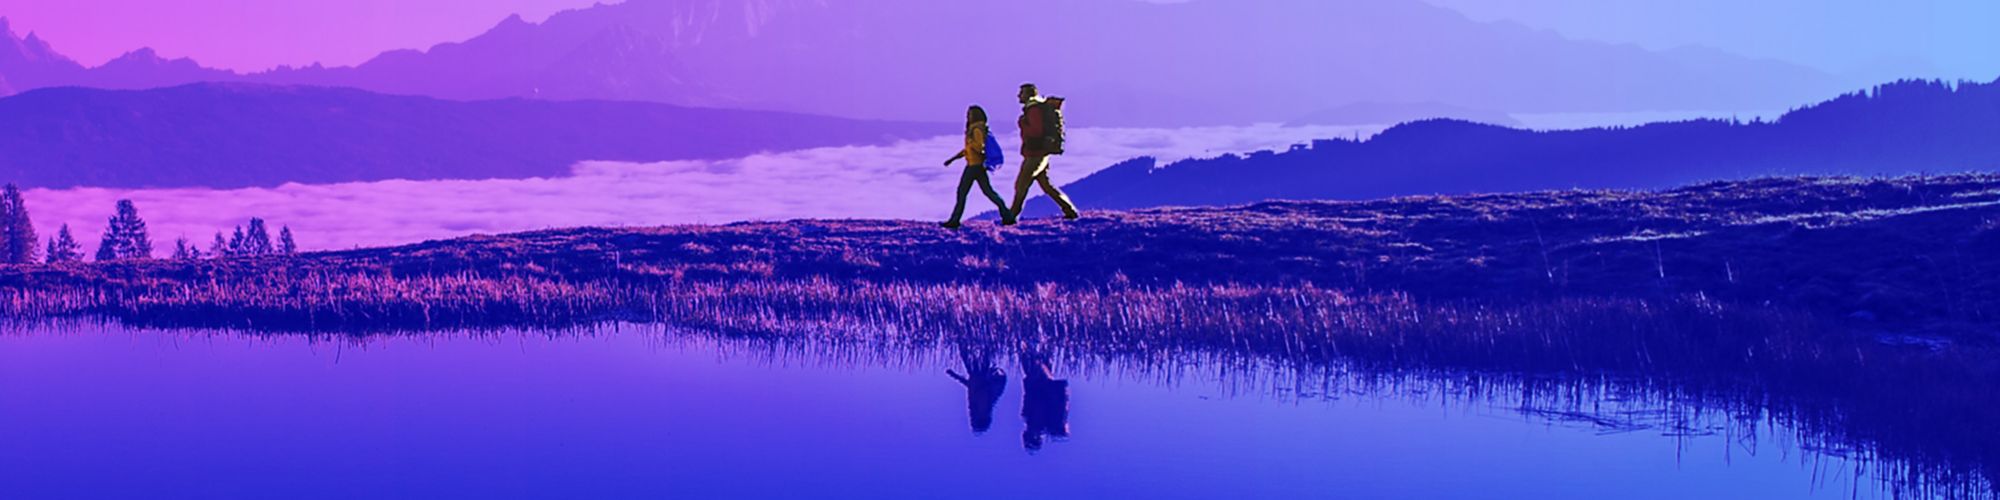 Two people walking in the mountains